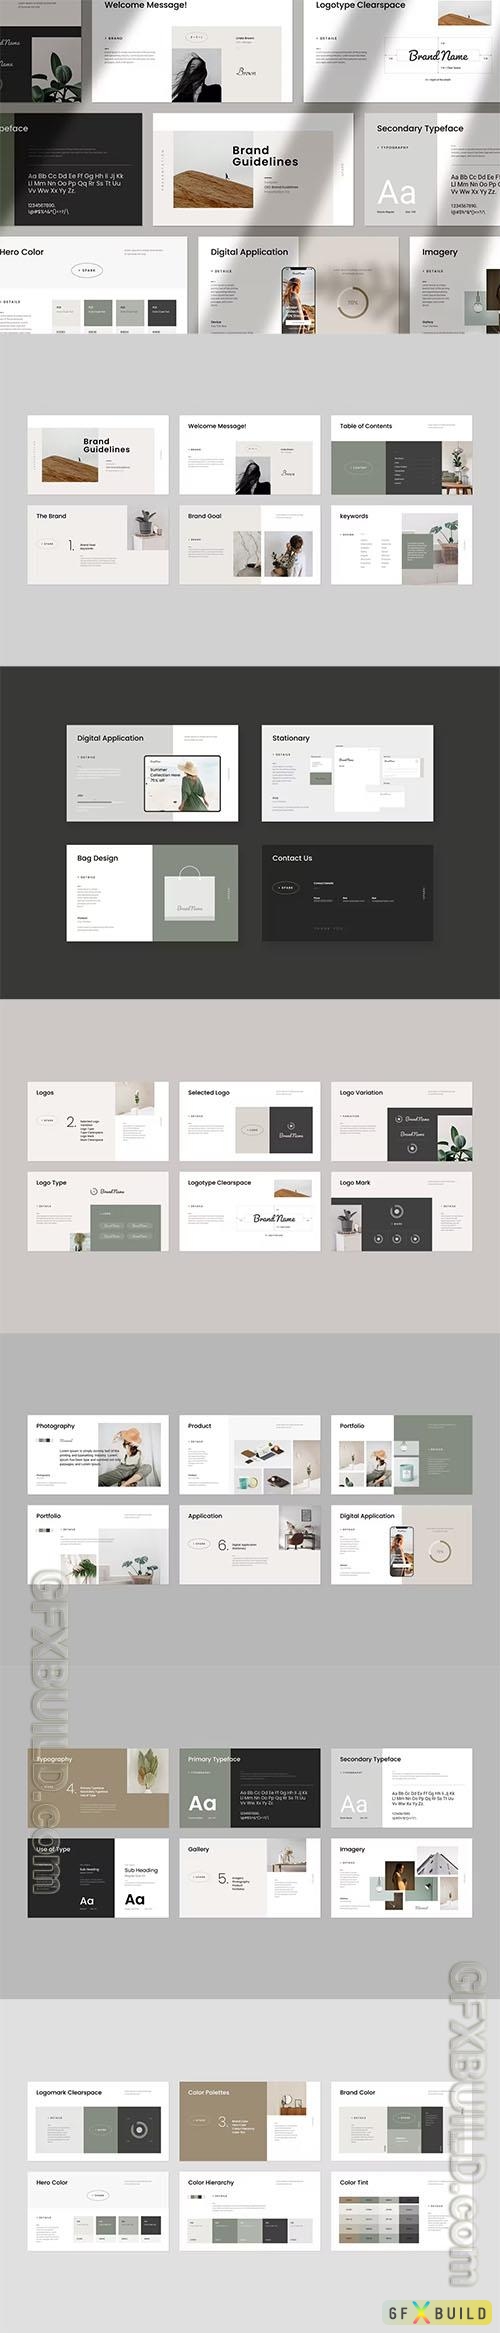 Brand Guideline PowerPoint Template